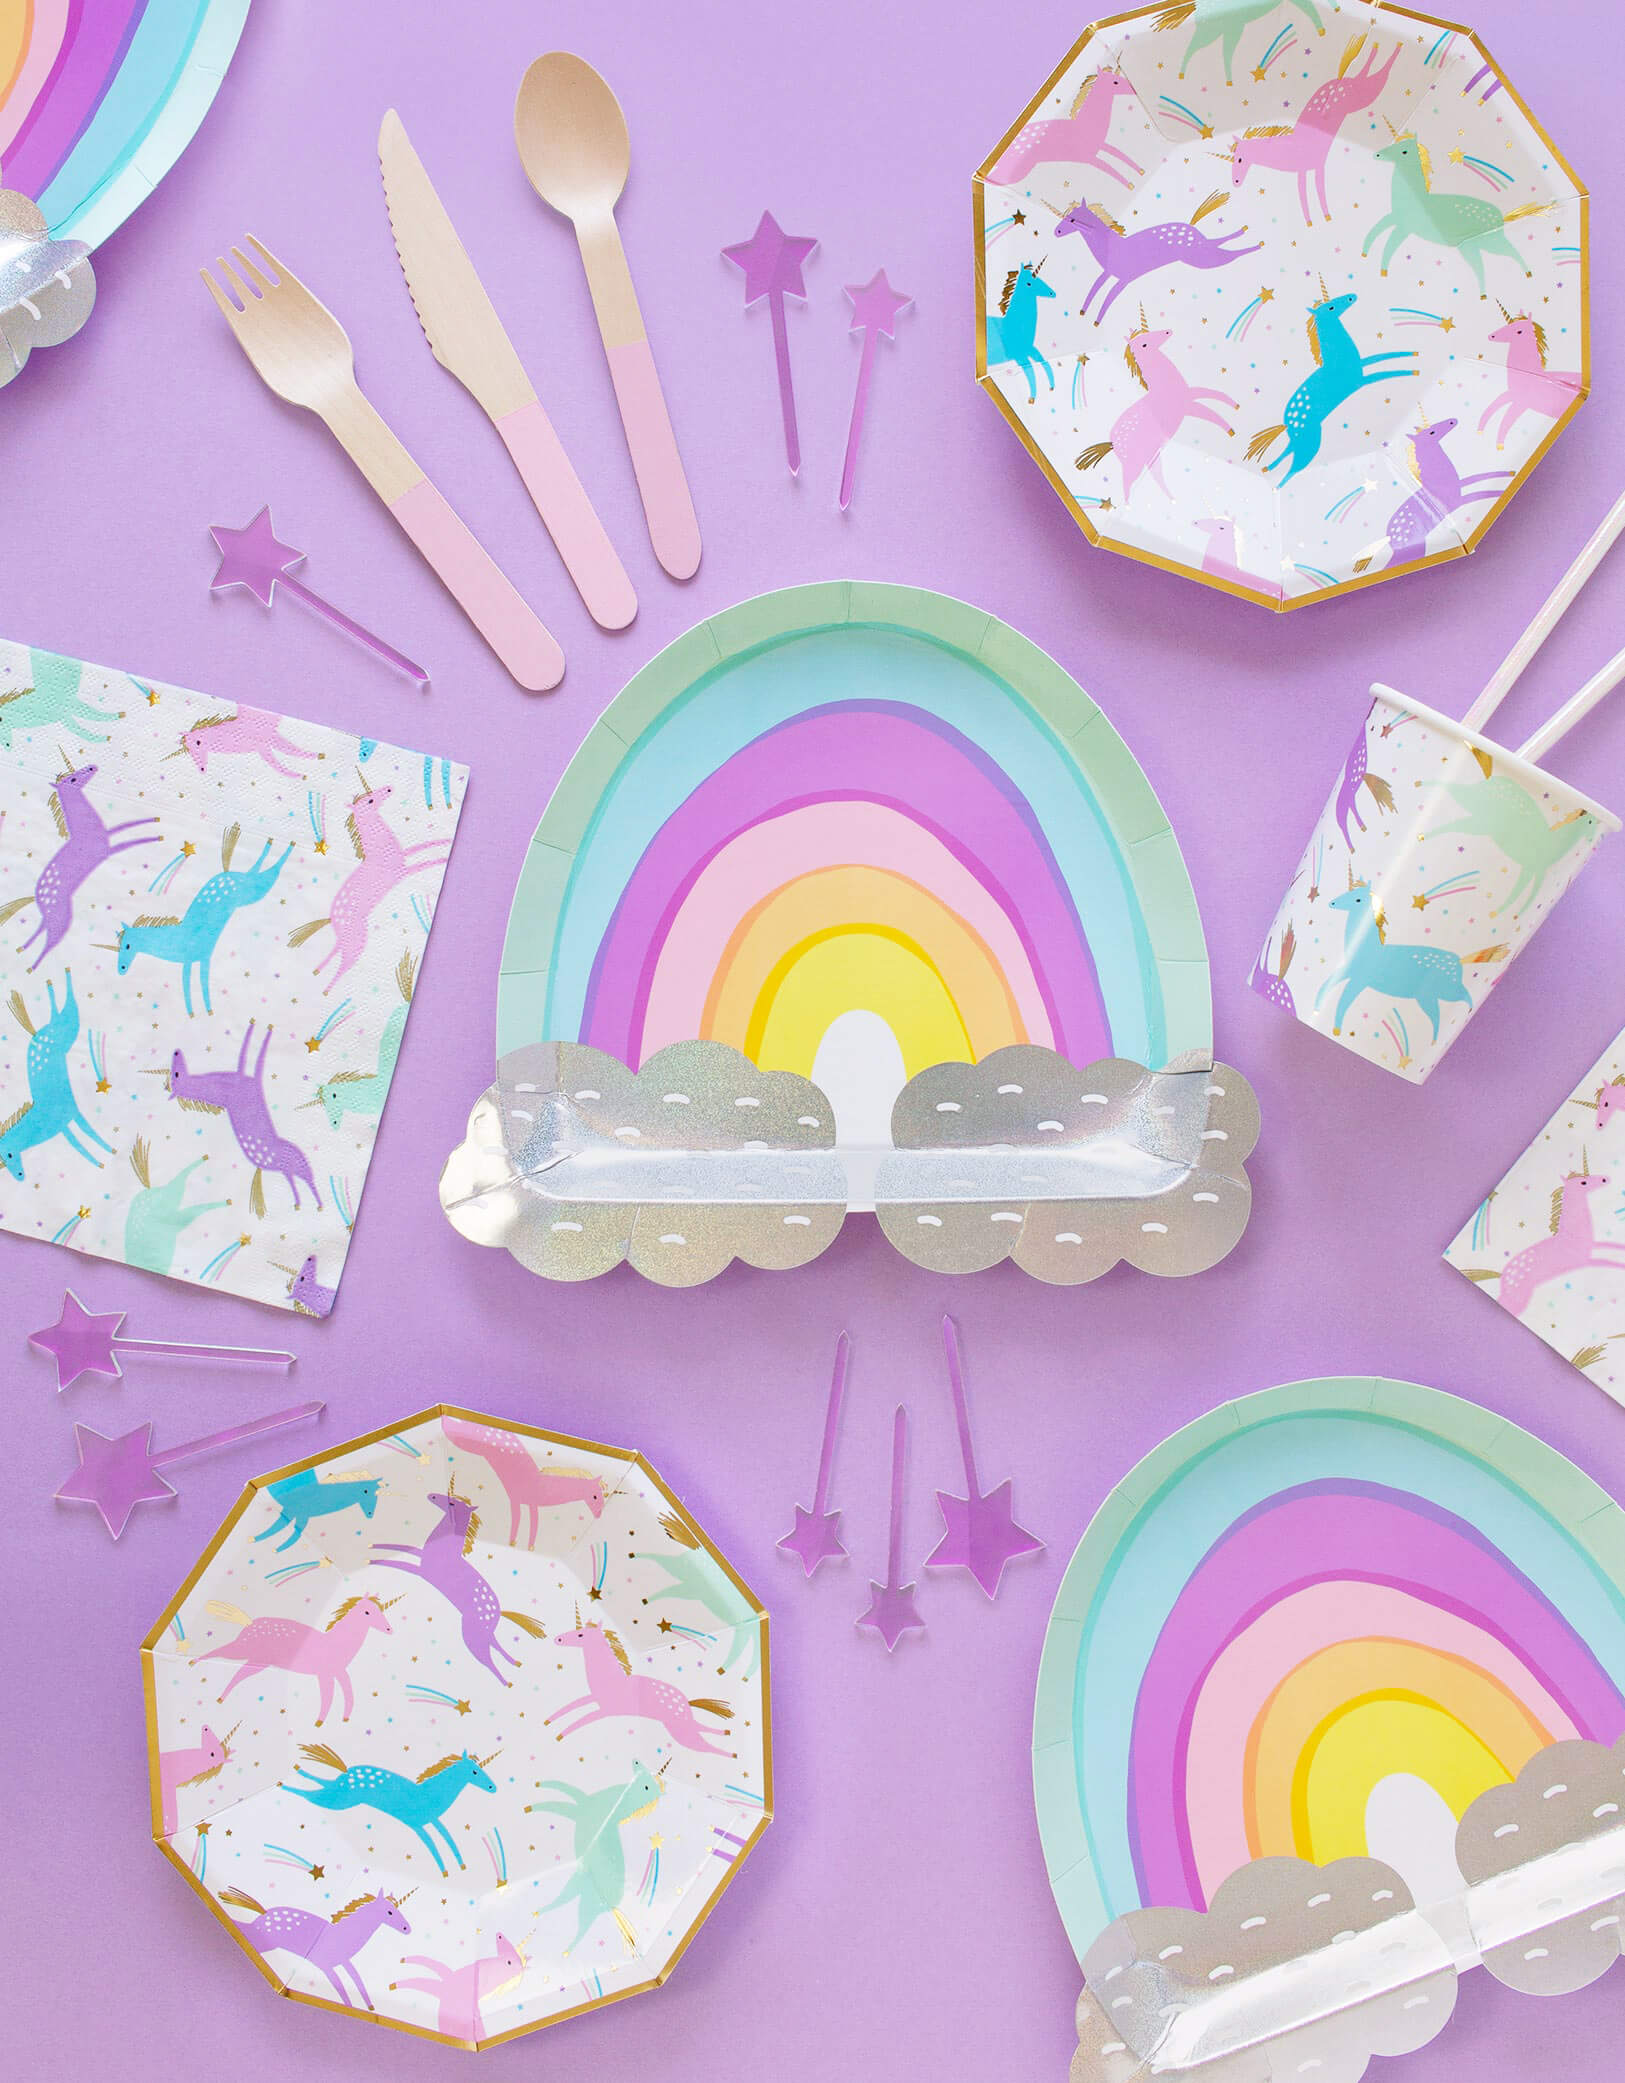 party in a box of kids unicorn theme birthday with unicorn plates, rainbow plates, unicorn cups and napkins. Party supplies box list of Pro unicorn box